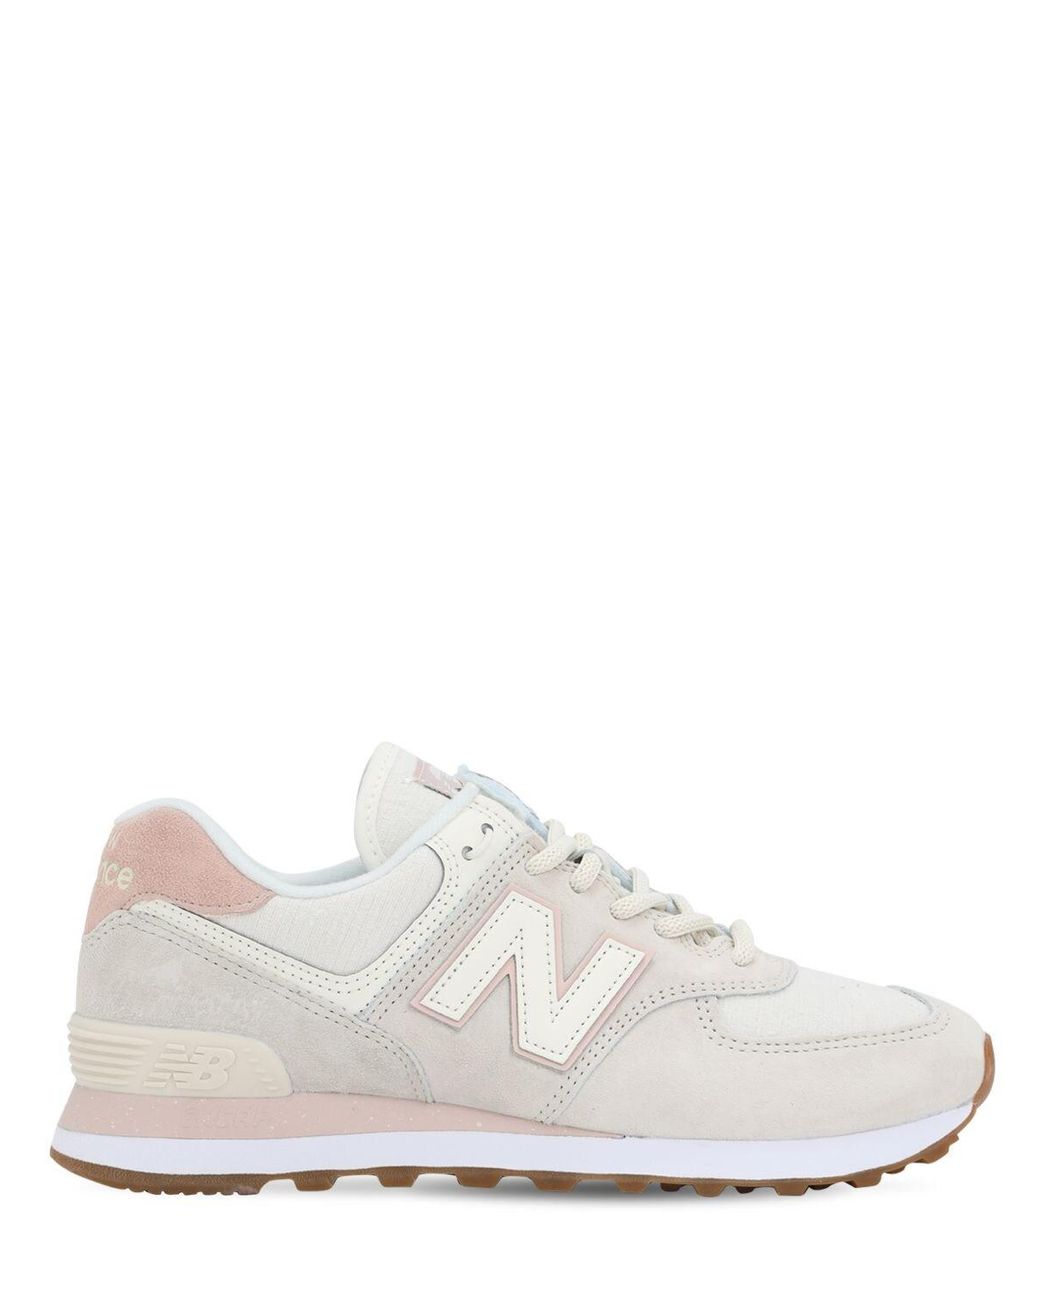 New Balance 574 Suede & Mesh Sneakers in White - Lyst